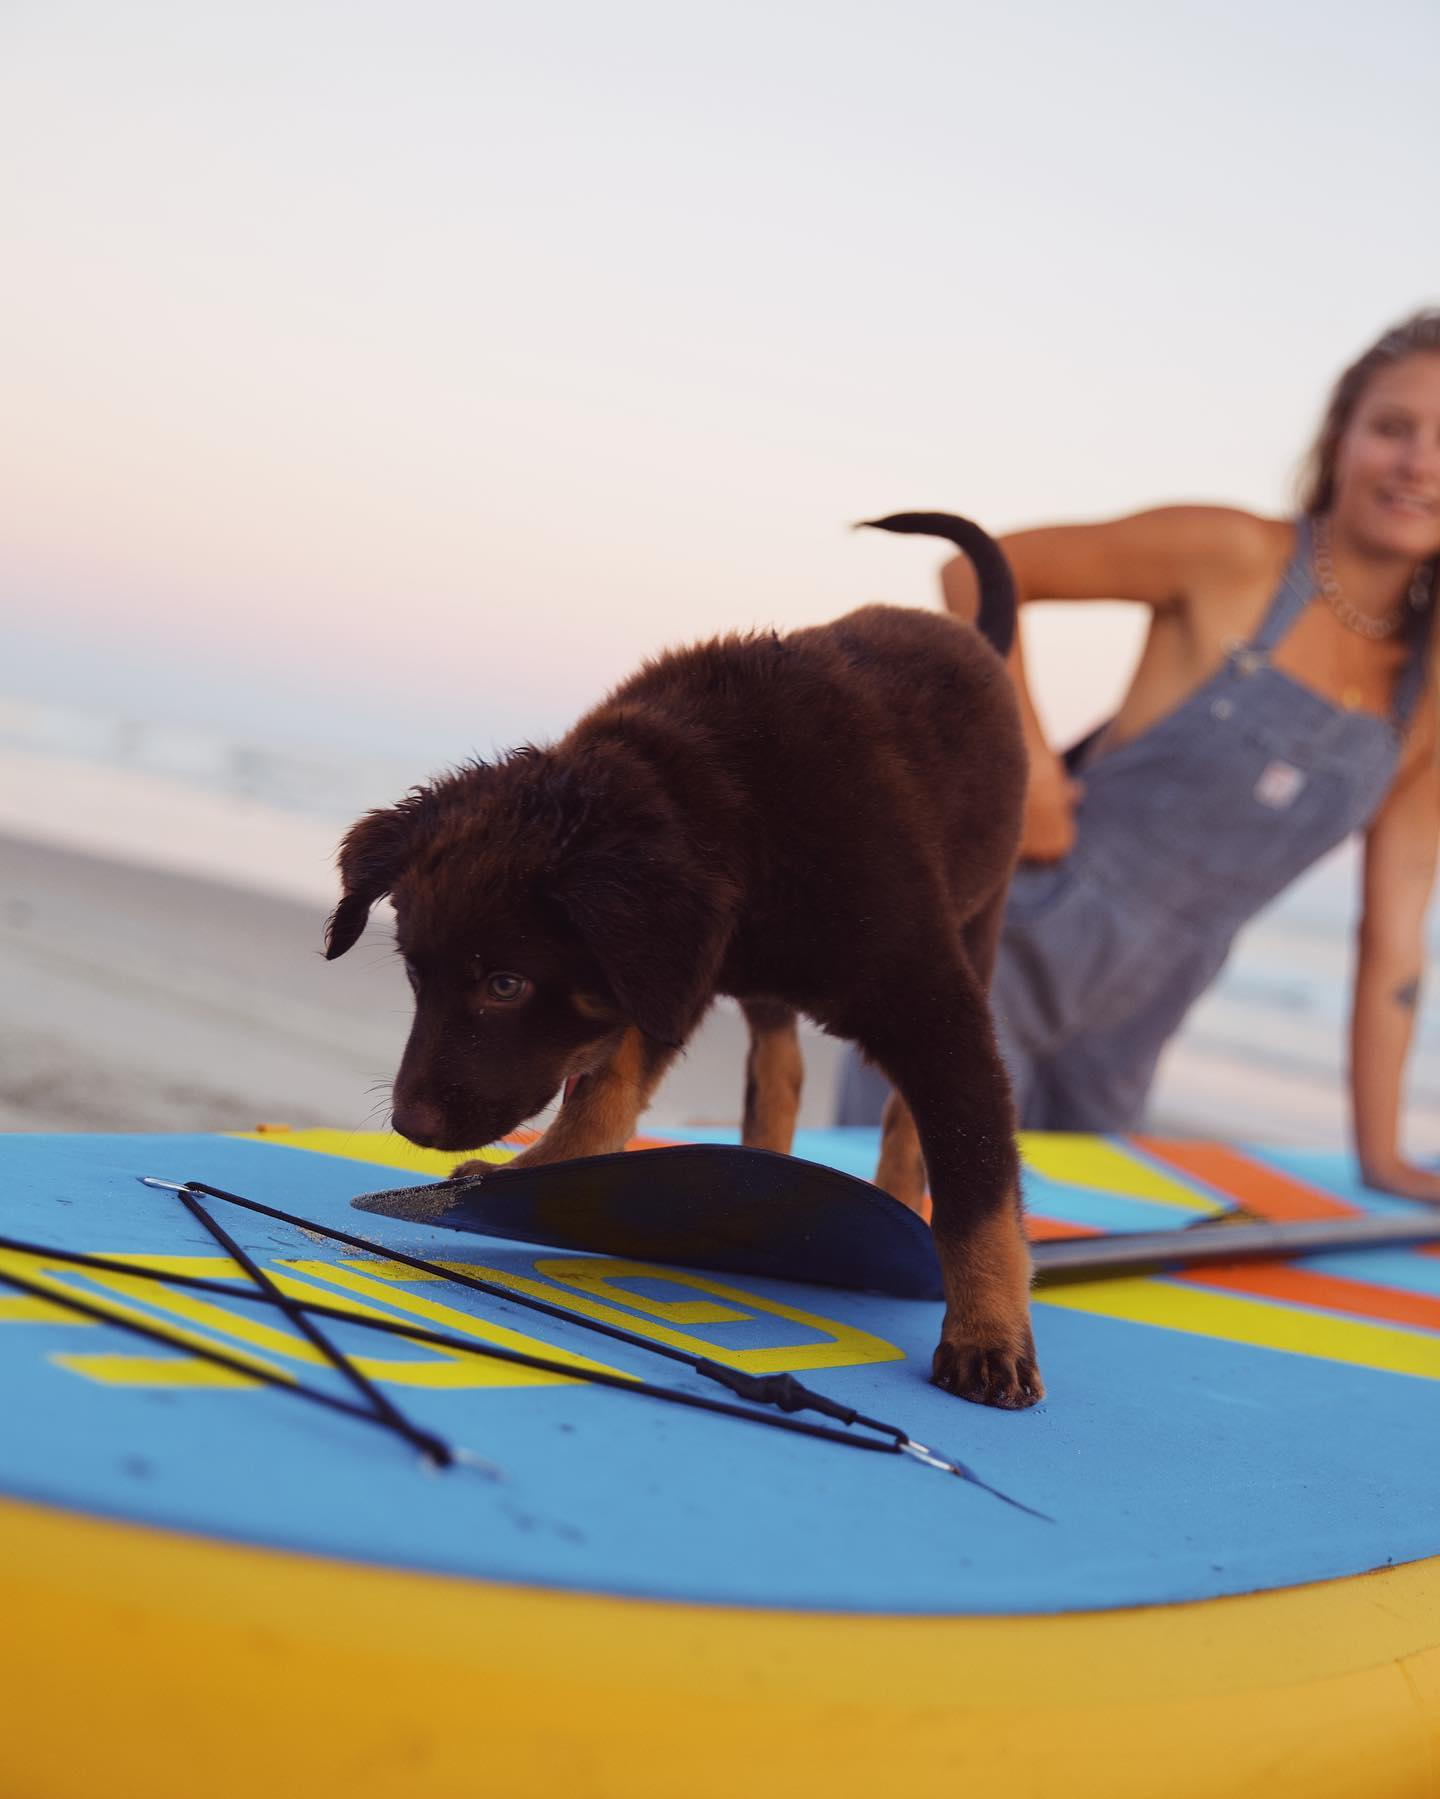 different paddle boards are an inflatable stand up paddle boards made with drop stitch and carbon fiber